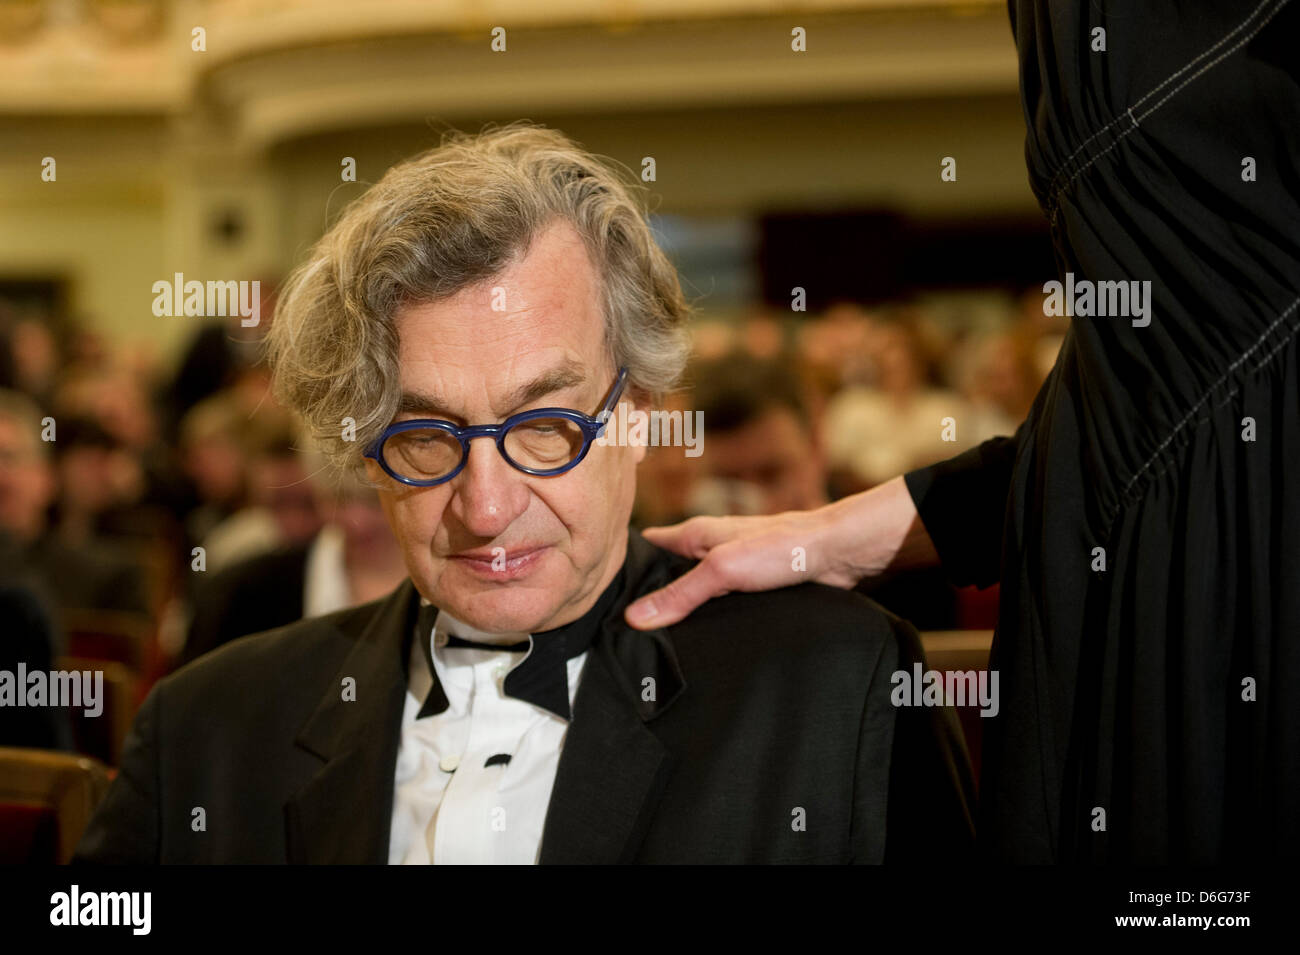 German director Wim Wenders attends the award ceremony of the gives the 3rd international peace prize, the Dresden Prize, to American documentary photographer James Nachtwey while his wife Donata puts her hand on his shoulder at the Semper Opera in Dresden, Germany, 11 February 2012. Photo: ARNO BURGI Stock Photo